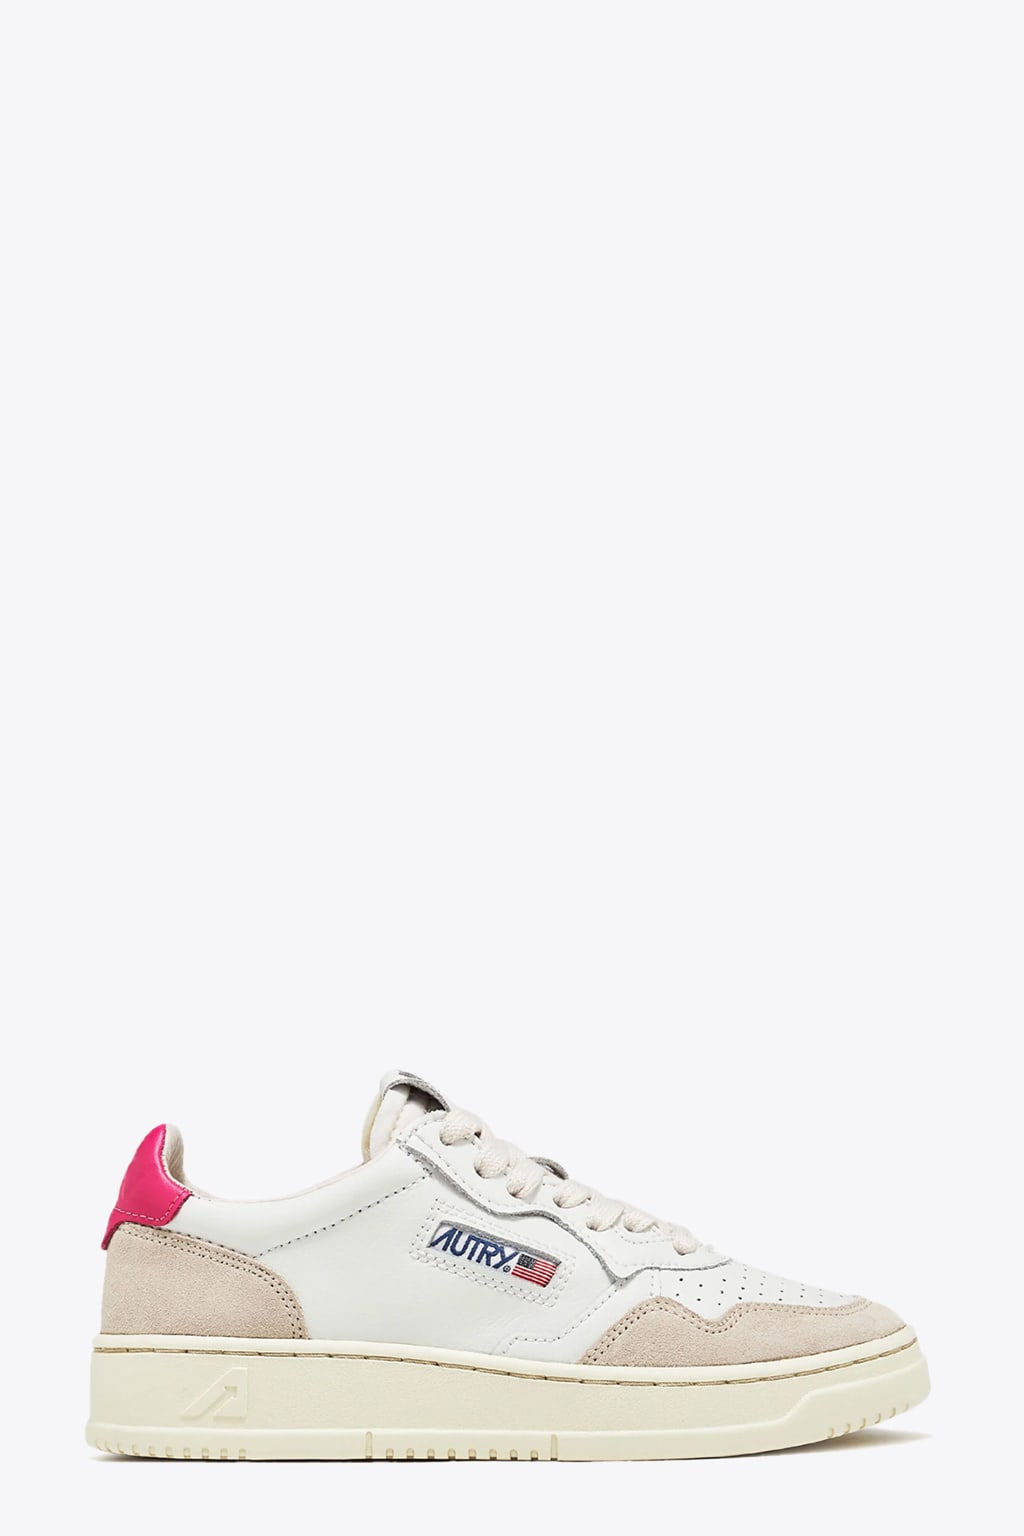 Autry 01 Low Wom Leat Suede Wht/bubble White leather and suede low sneaker with pink tab - Medalist